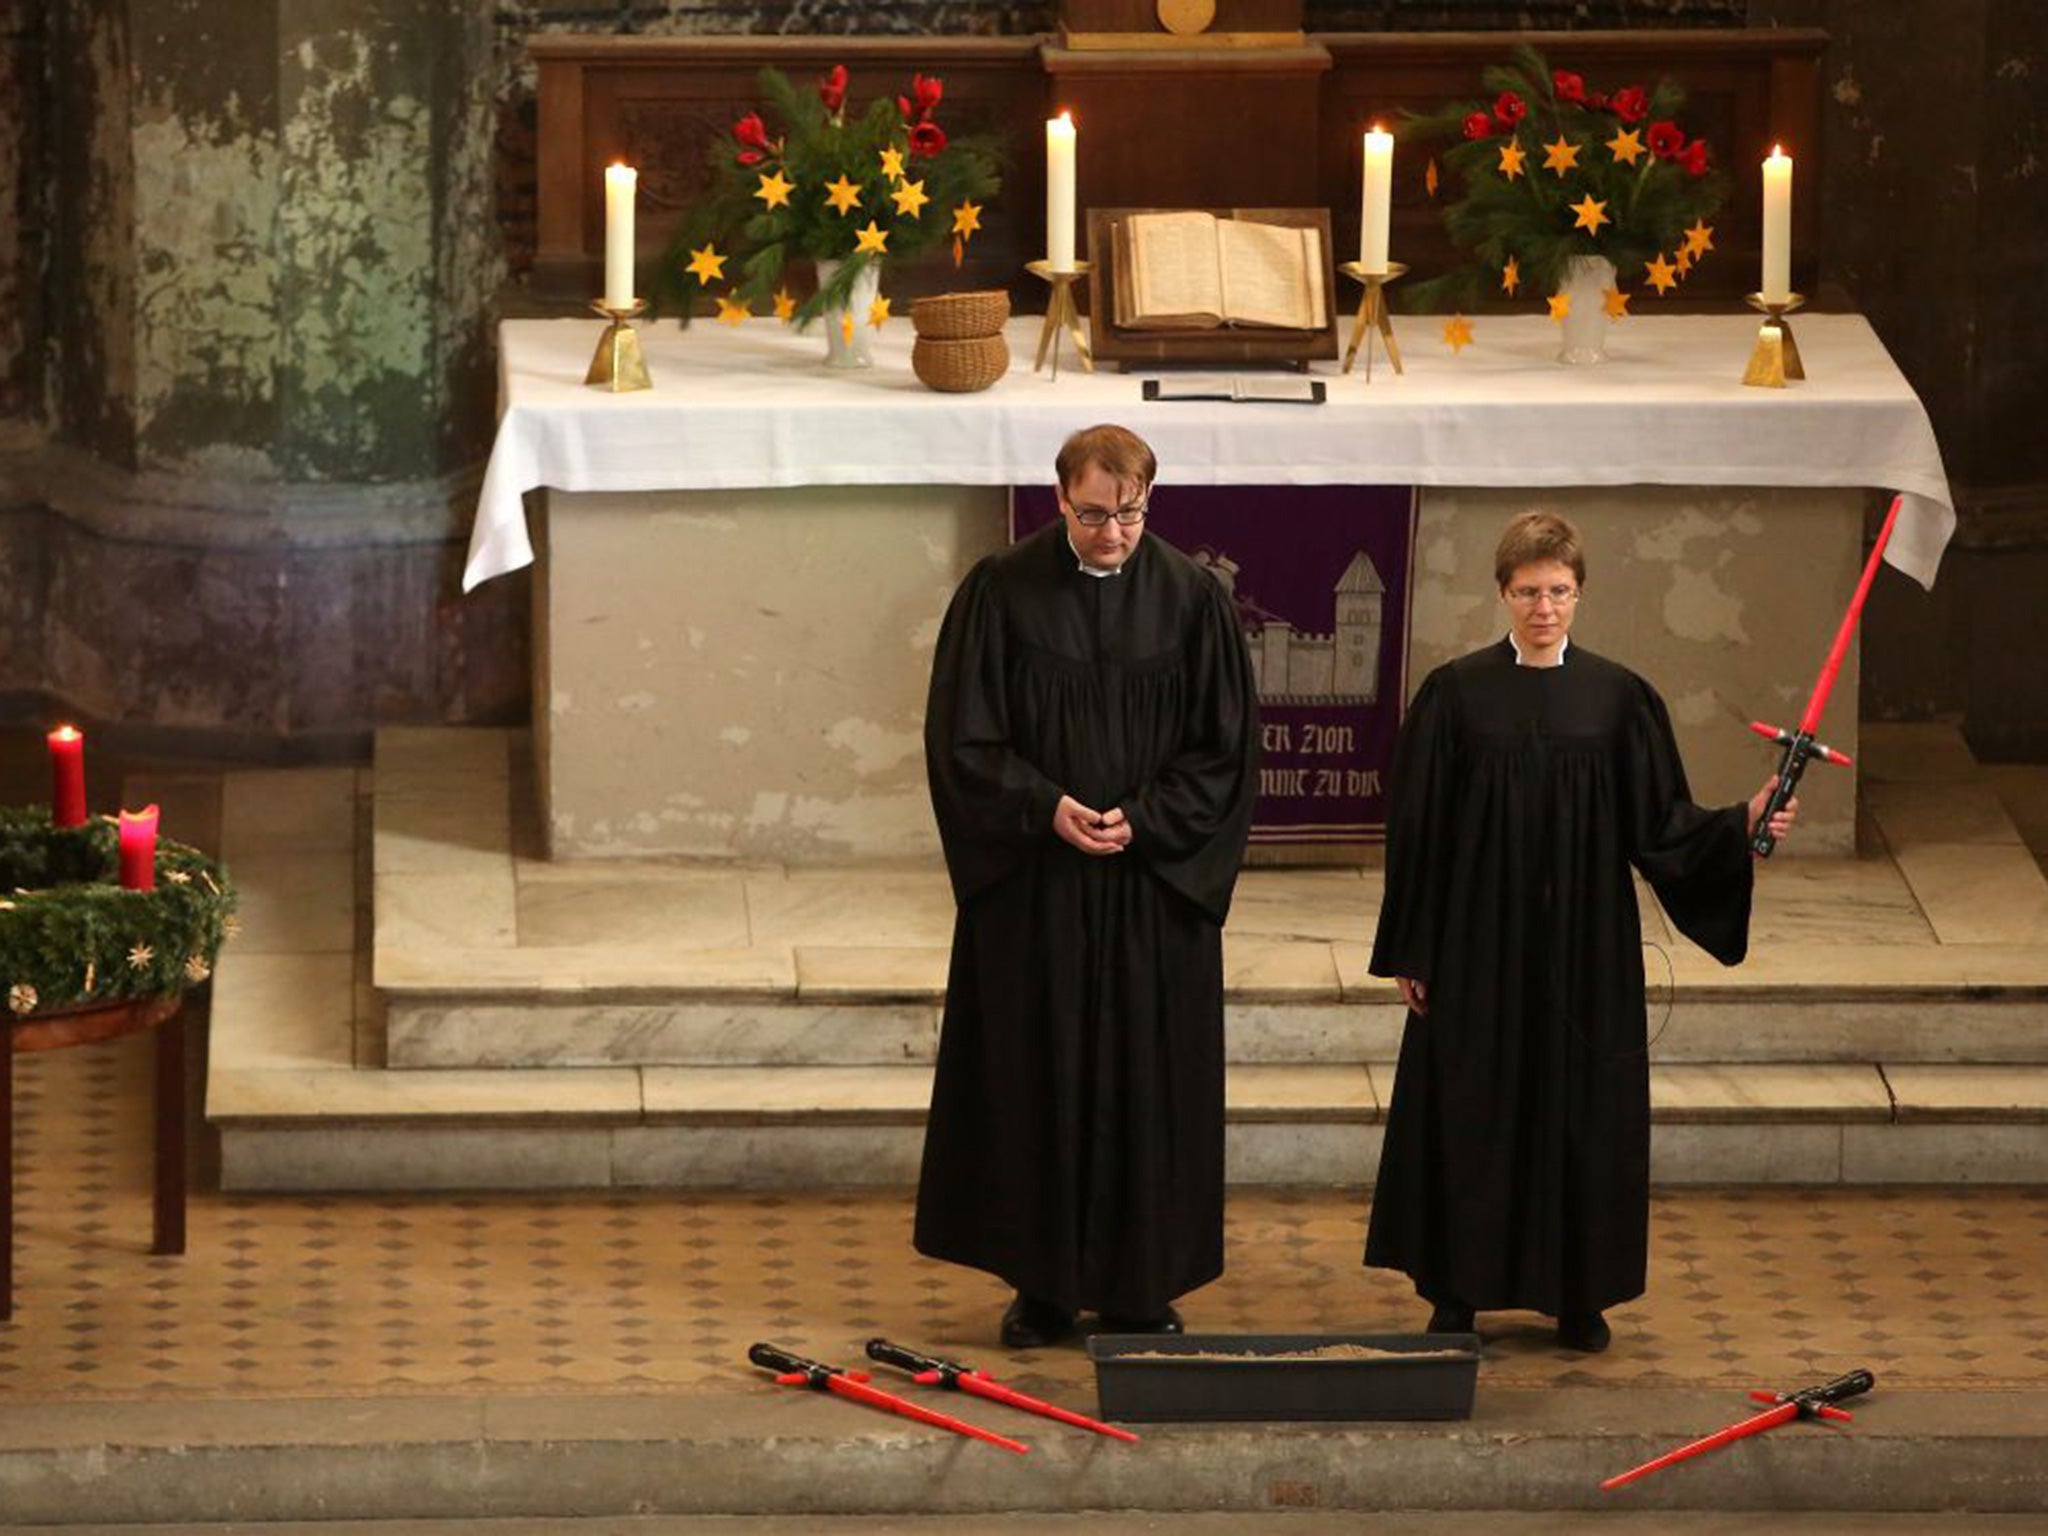 Vicars Lucas Ludewig (L) and Ulrike Garve hold a church service centered around 'Return of the Jedi' at the Zionskirche